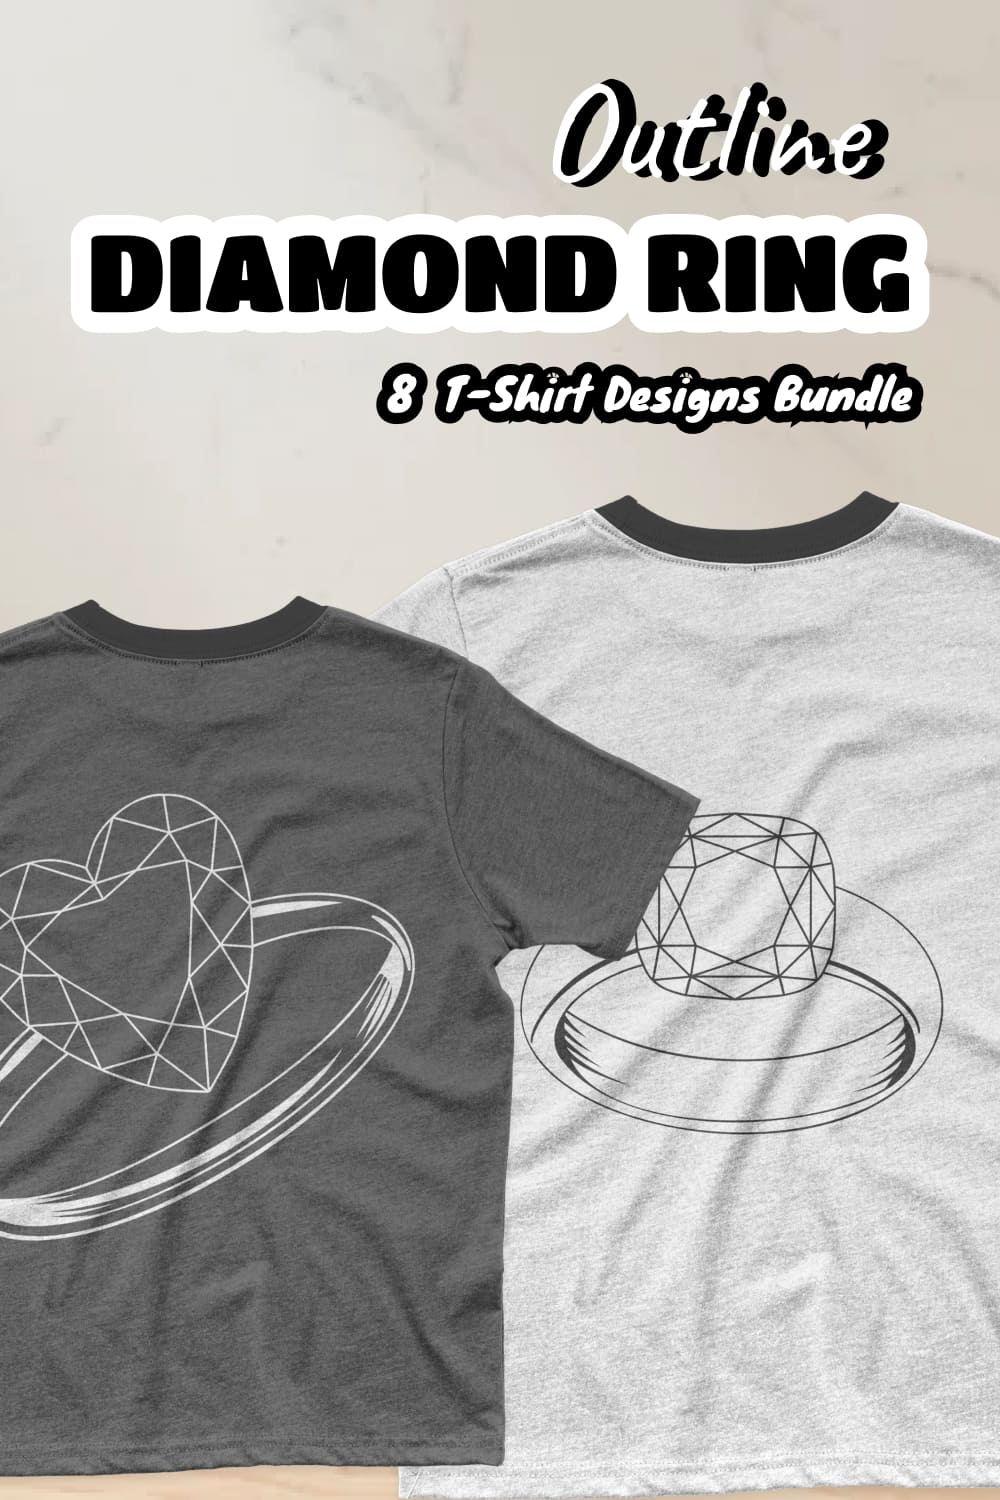 Bundle of t-shirt images with colorful outline diamond ring prints.